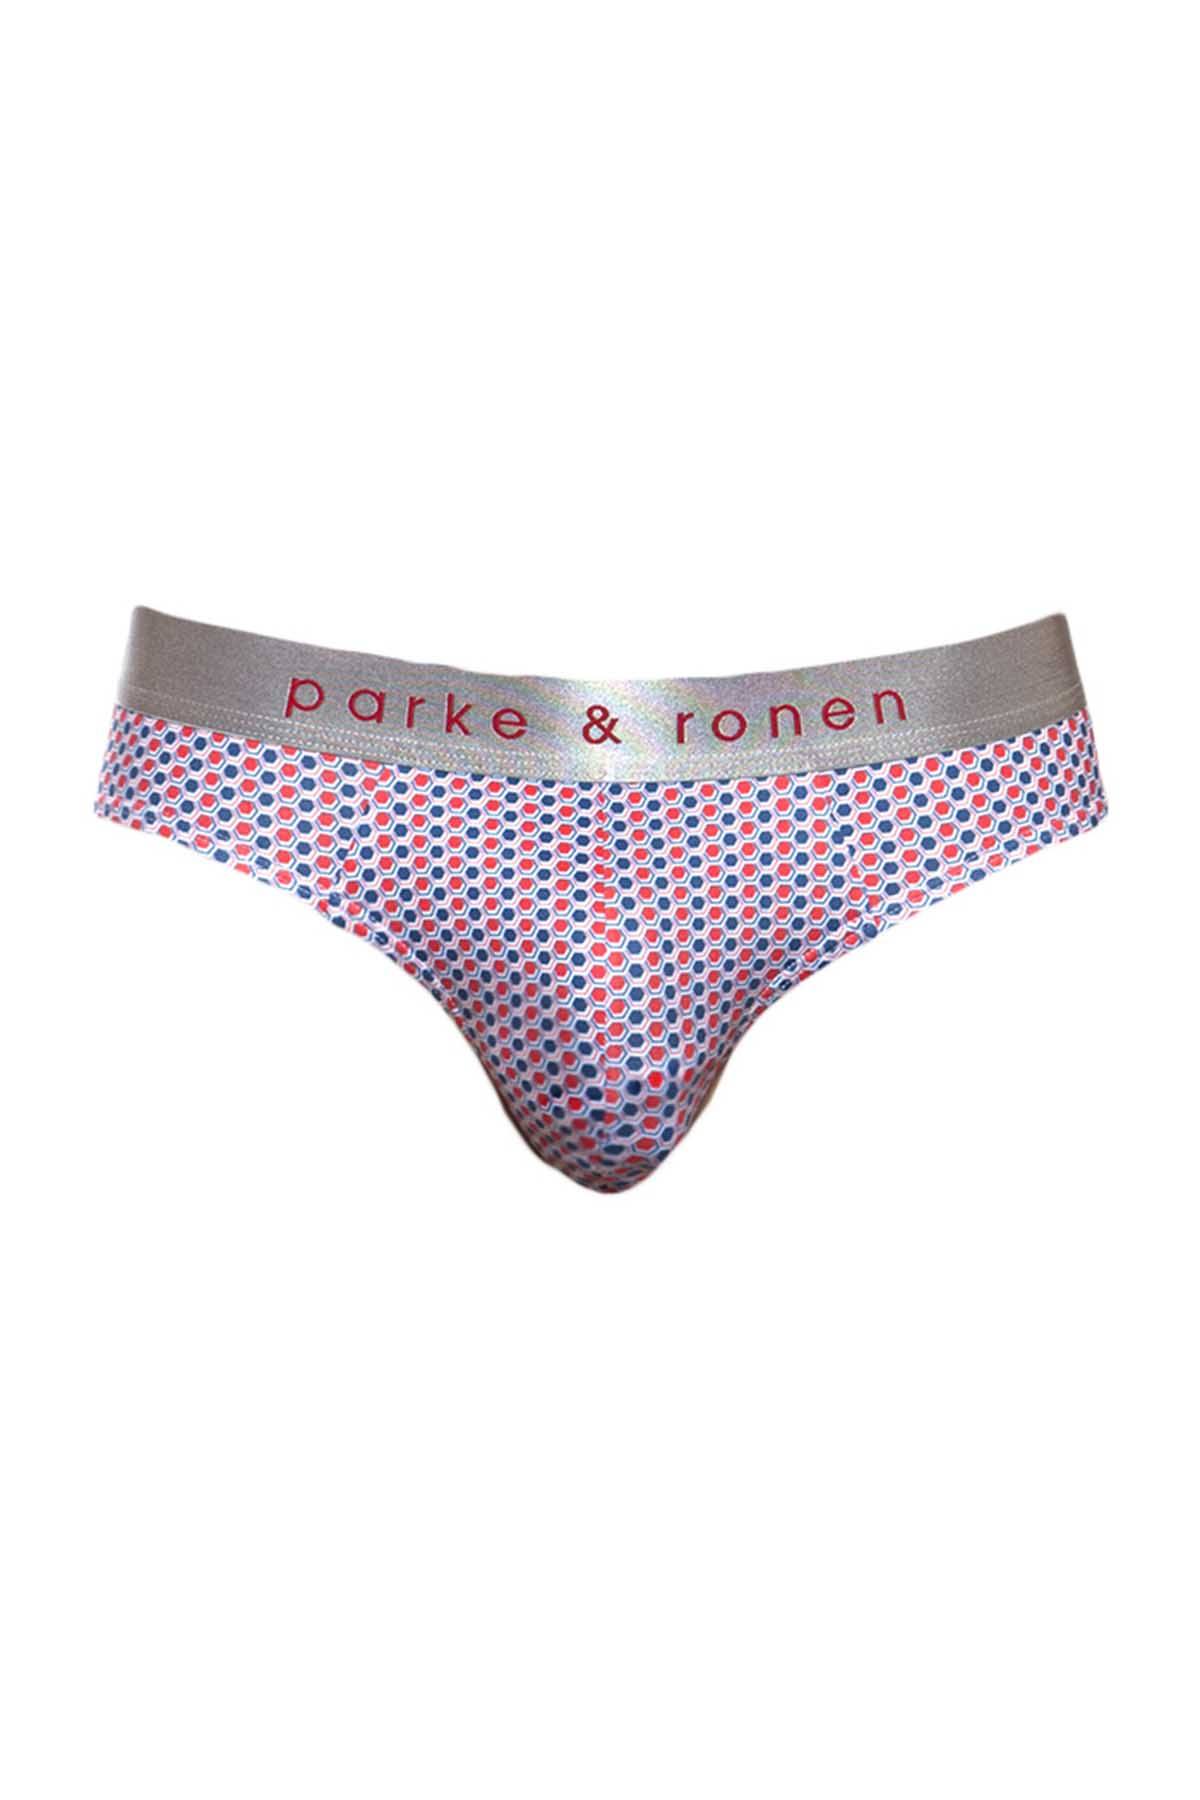 Parke & Ronen Cherry/Blue Printed Clipper Low-Rise Brief